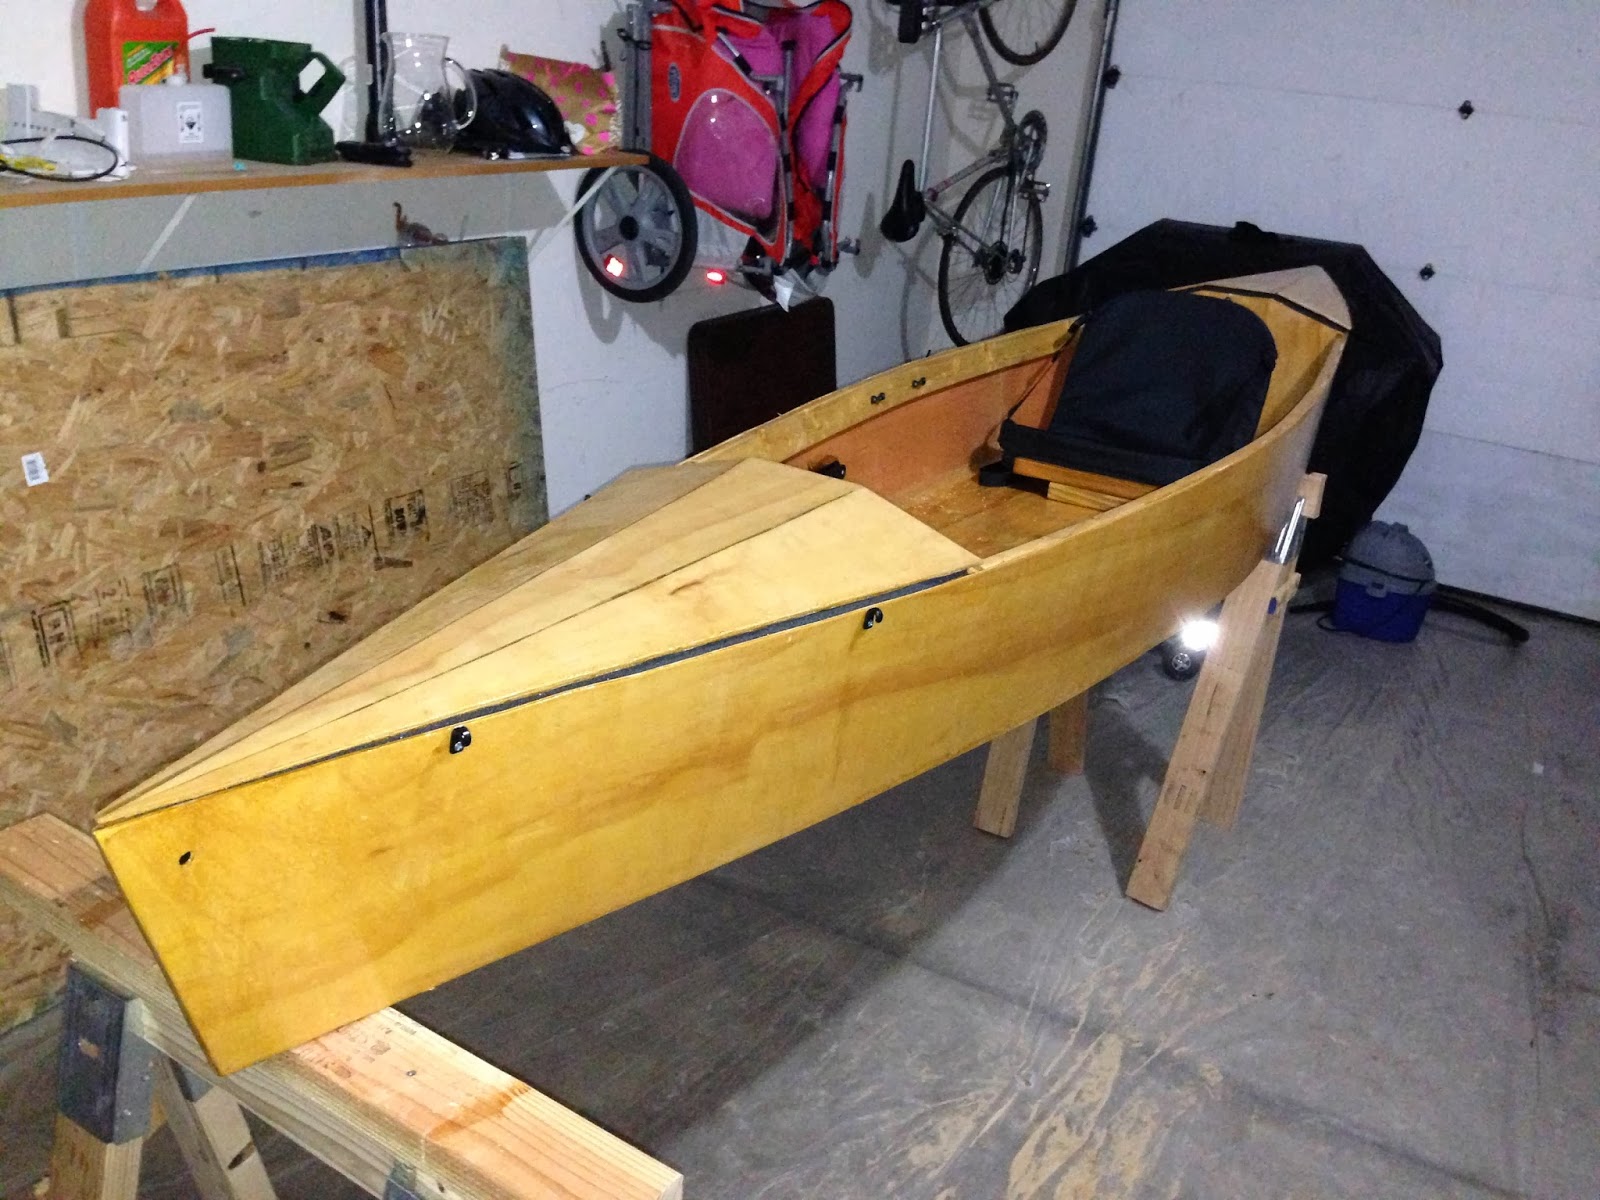 stitch and glue kayak: 8 steps with pictures